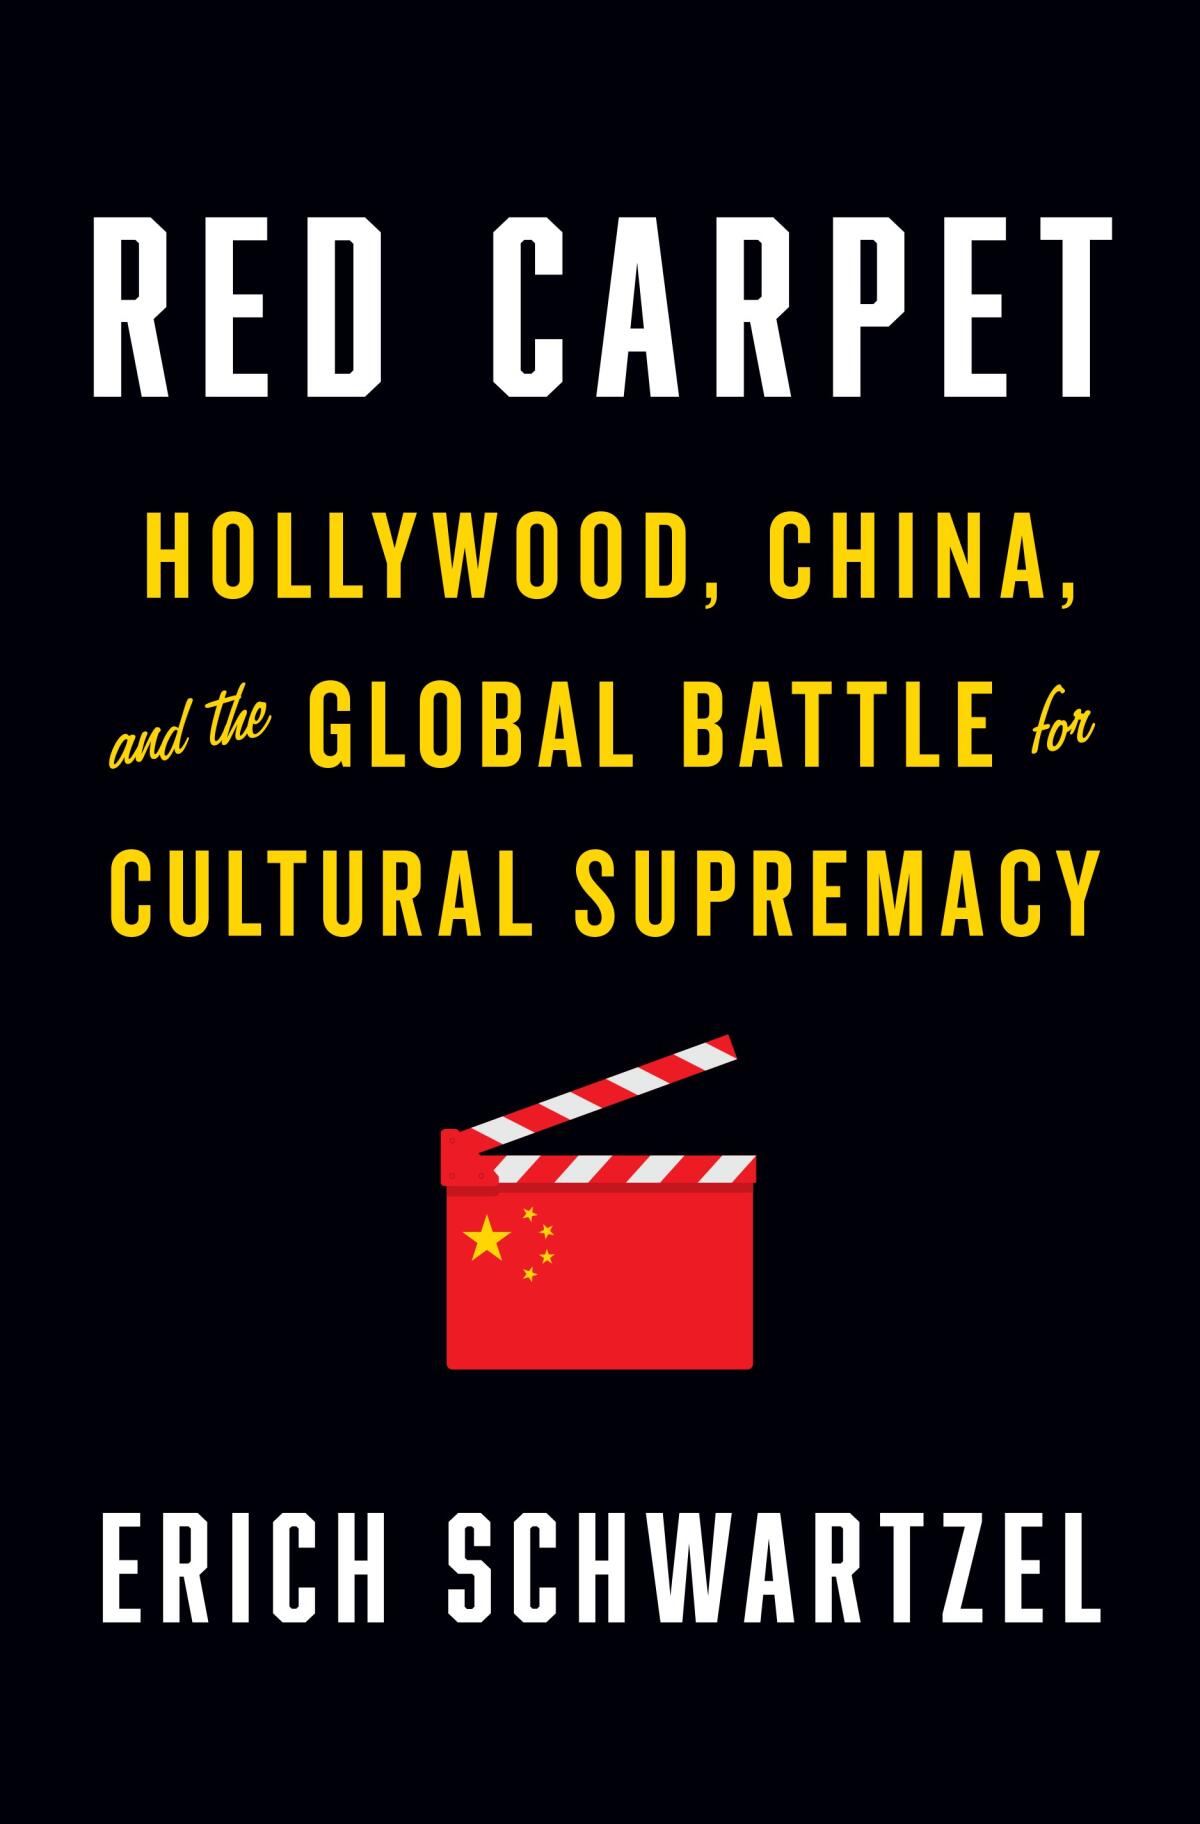 The book "Red Carpet: Hollywood, China, and the Global Battle for Cultural Supremacy," by Erich Schwartzel